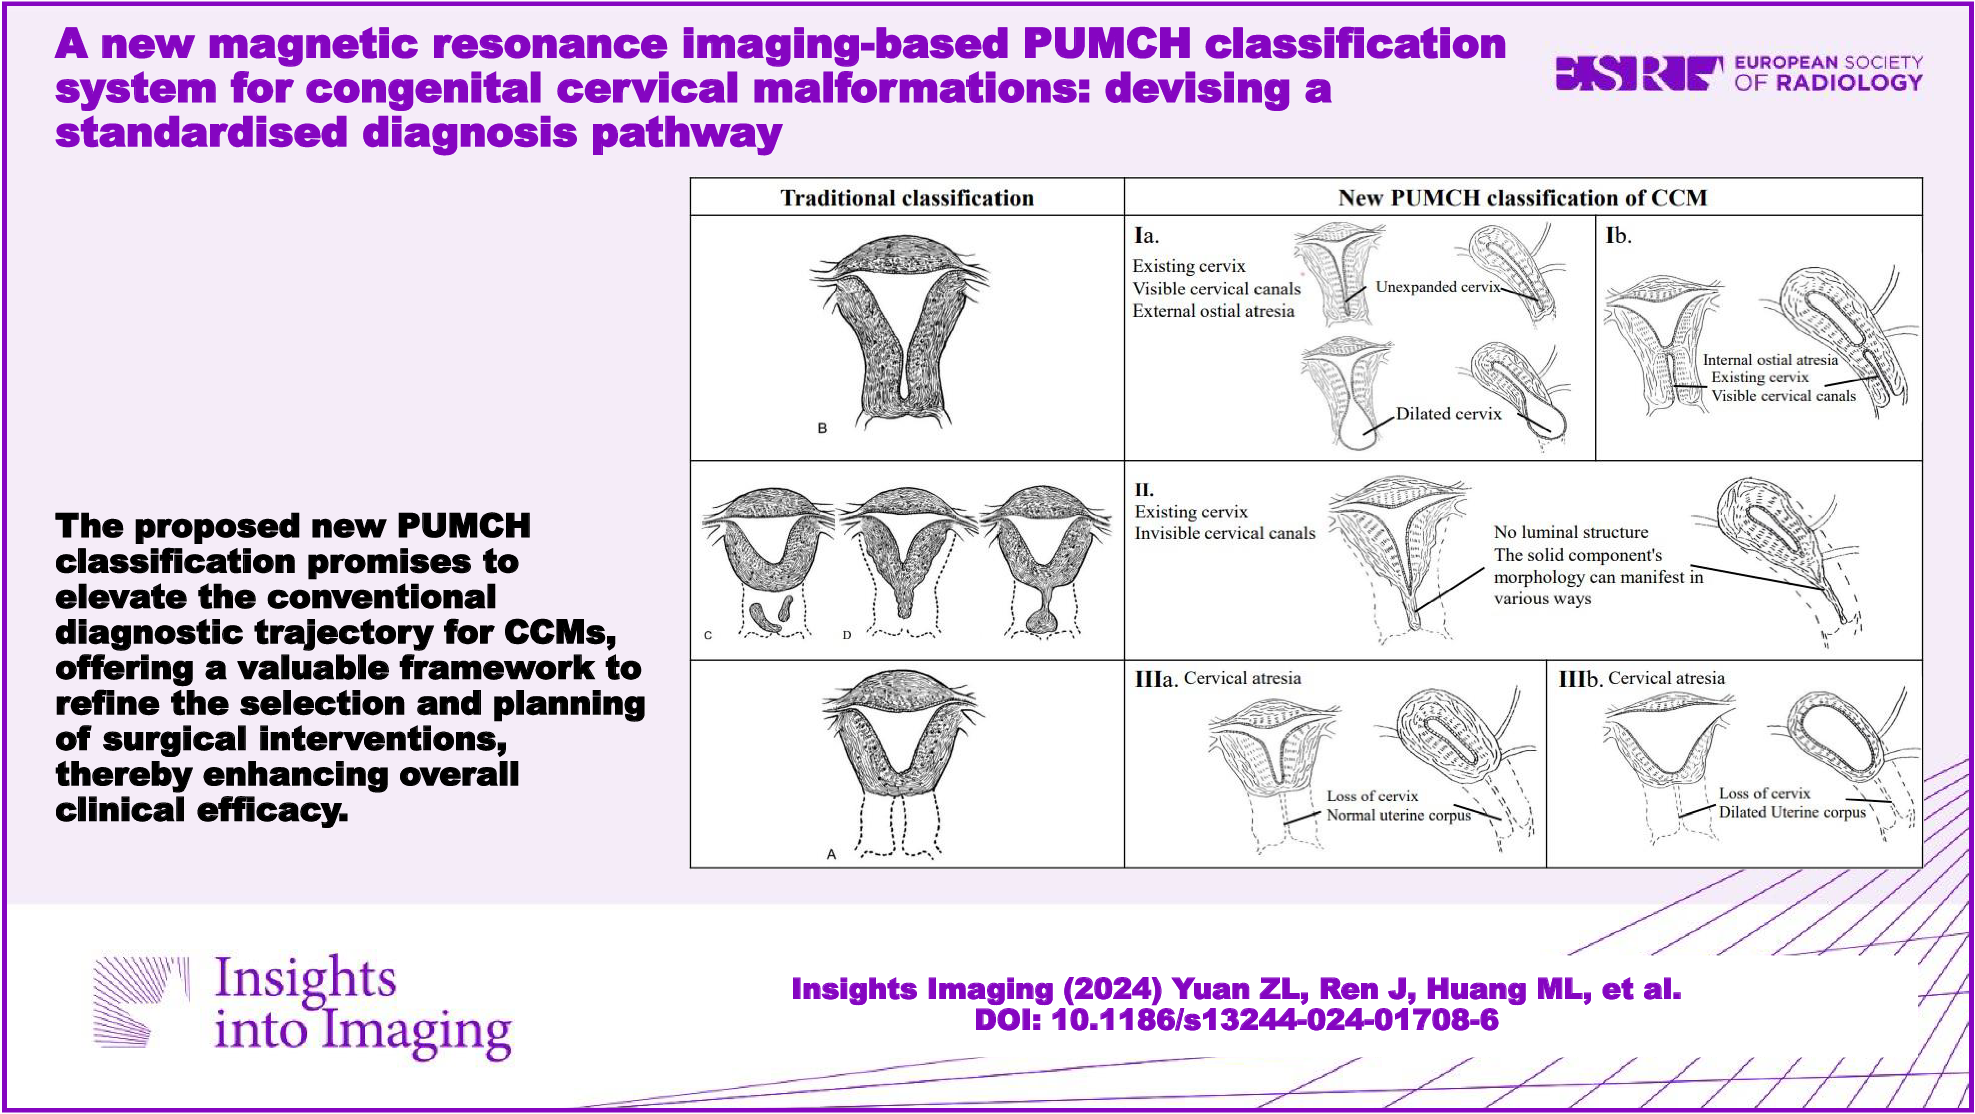 A new magnetic resonance imaging-based PUMCH classification system for congenital cervical malformations: devising a standardised diagnosis pathway